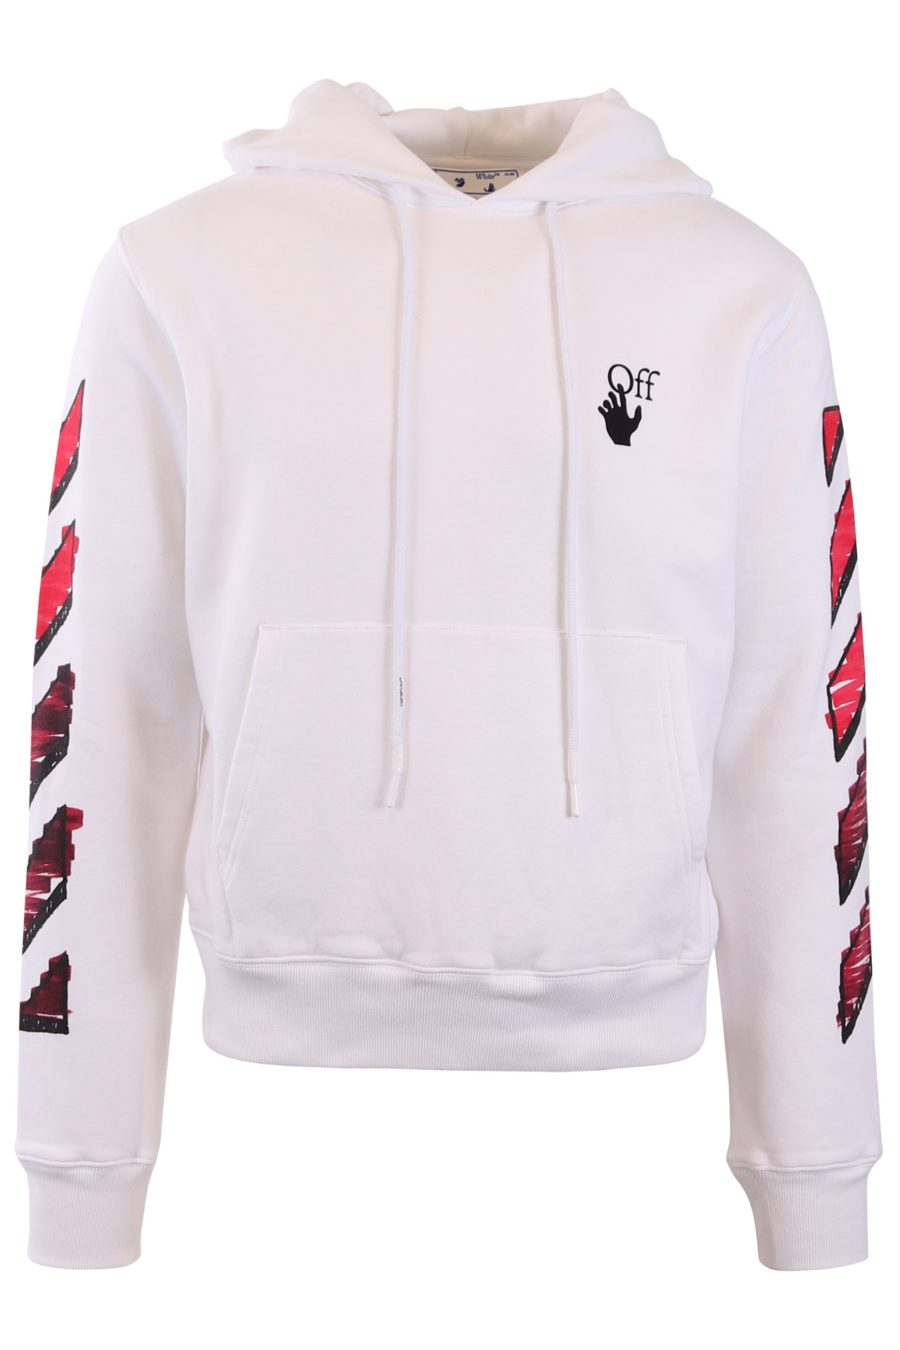 Off-White white hoodie with red arrows - 7d6dbe46e994018719949a698efeb31e4c92bdb4